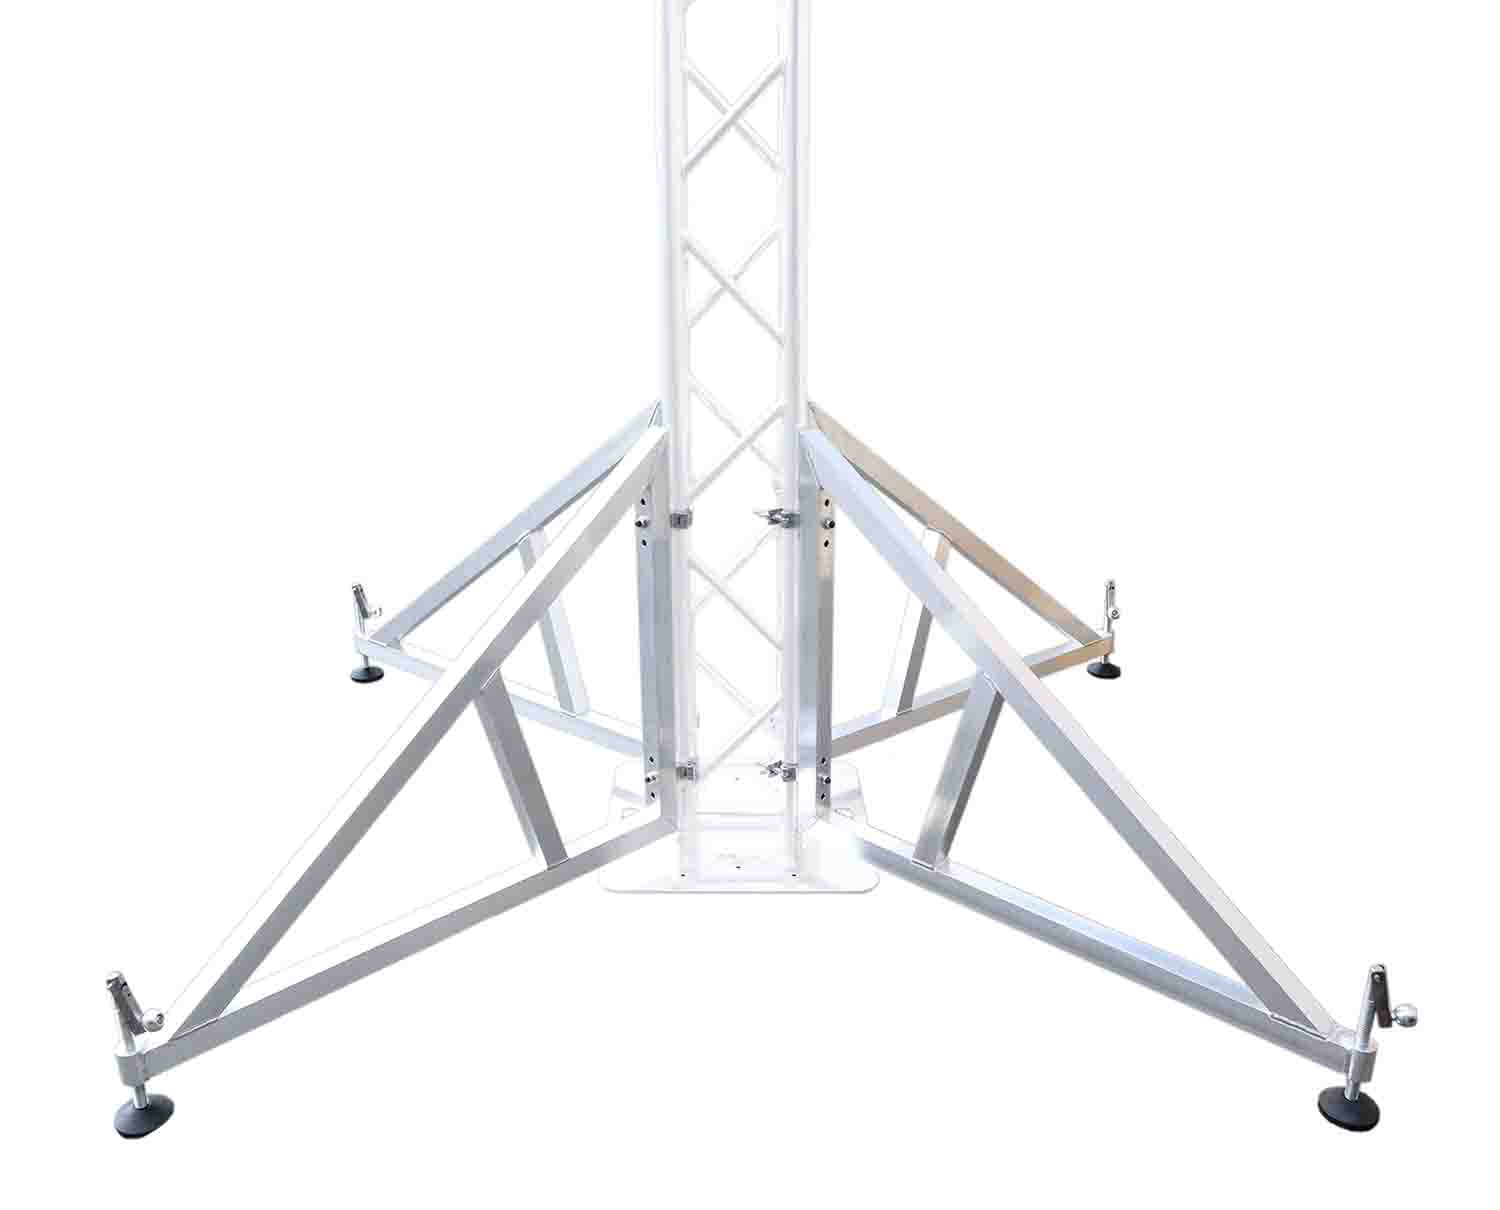 ProX XT-AC463X2 Pair of Vertical truss towers outrigger Leg Stabilizers with 2 clamps for F34 and 12" Bolted Truss 2" Pipe Diameter - Hollywood DJ